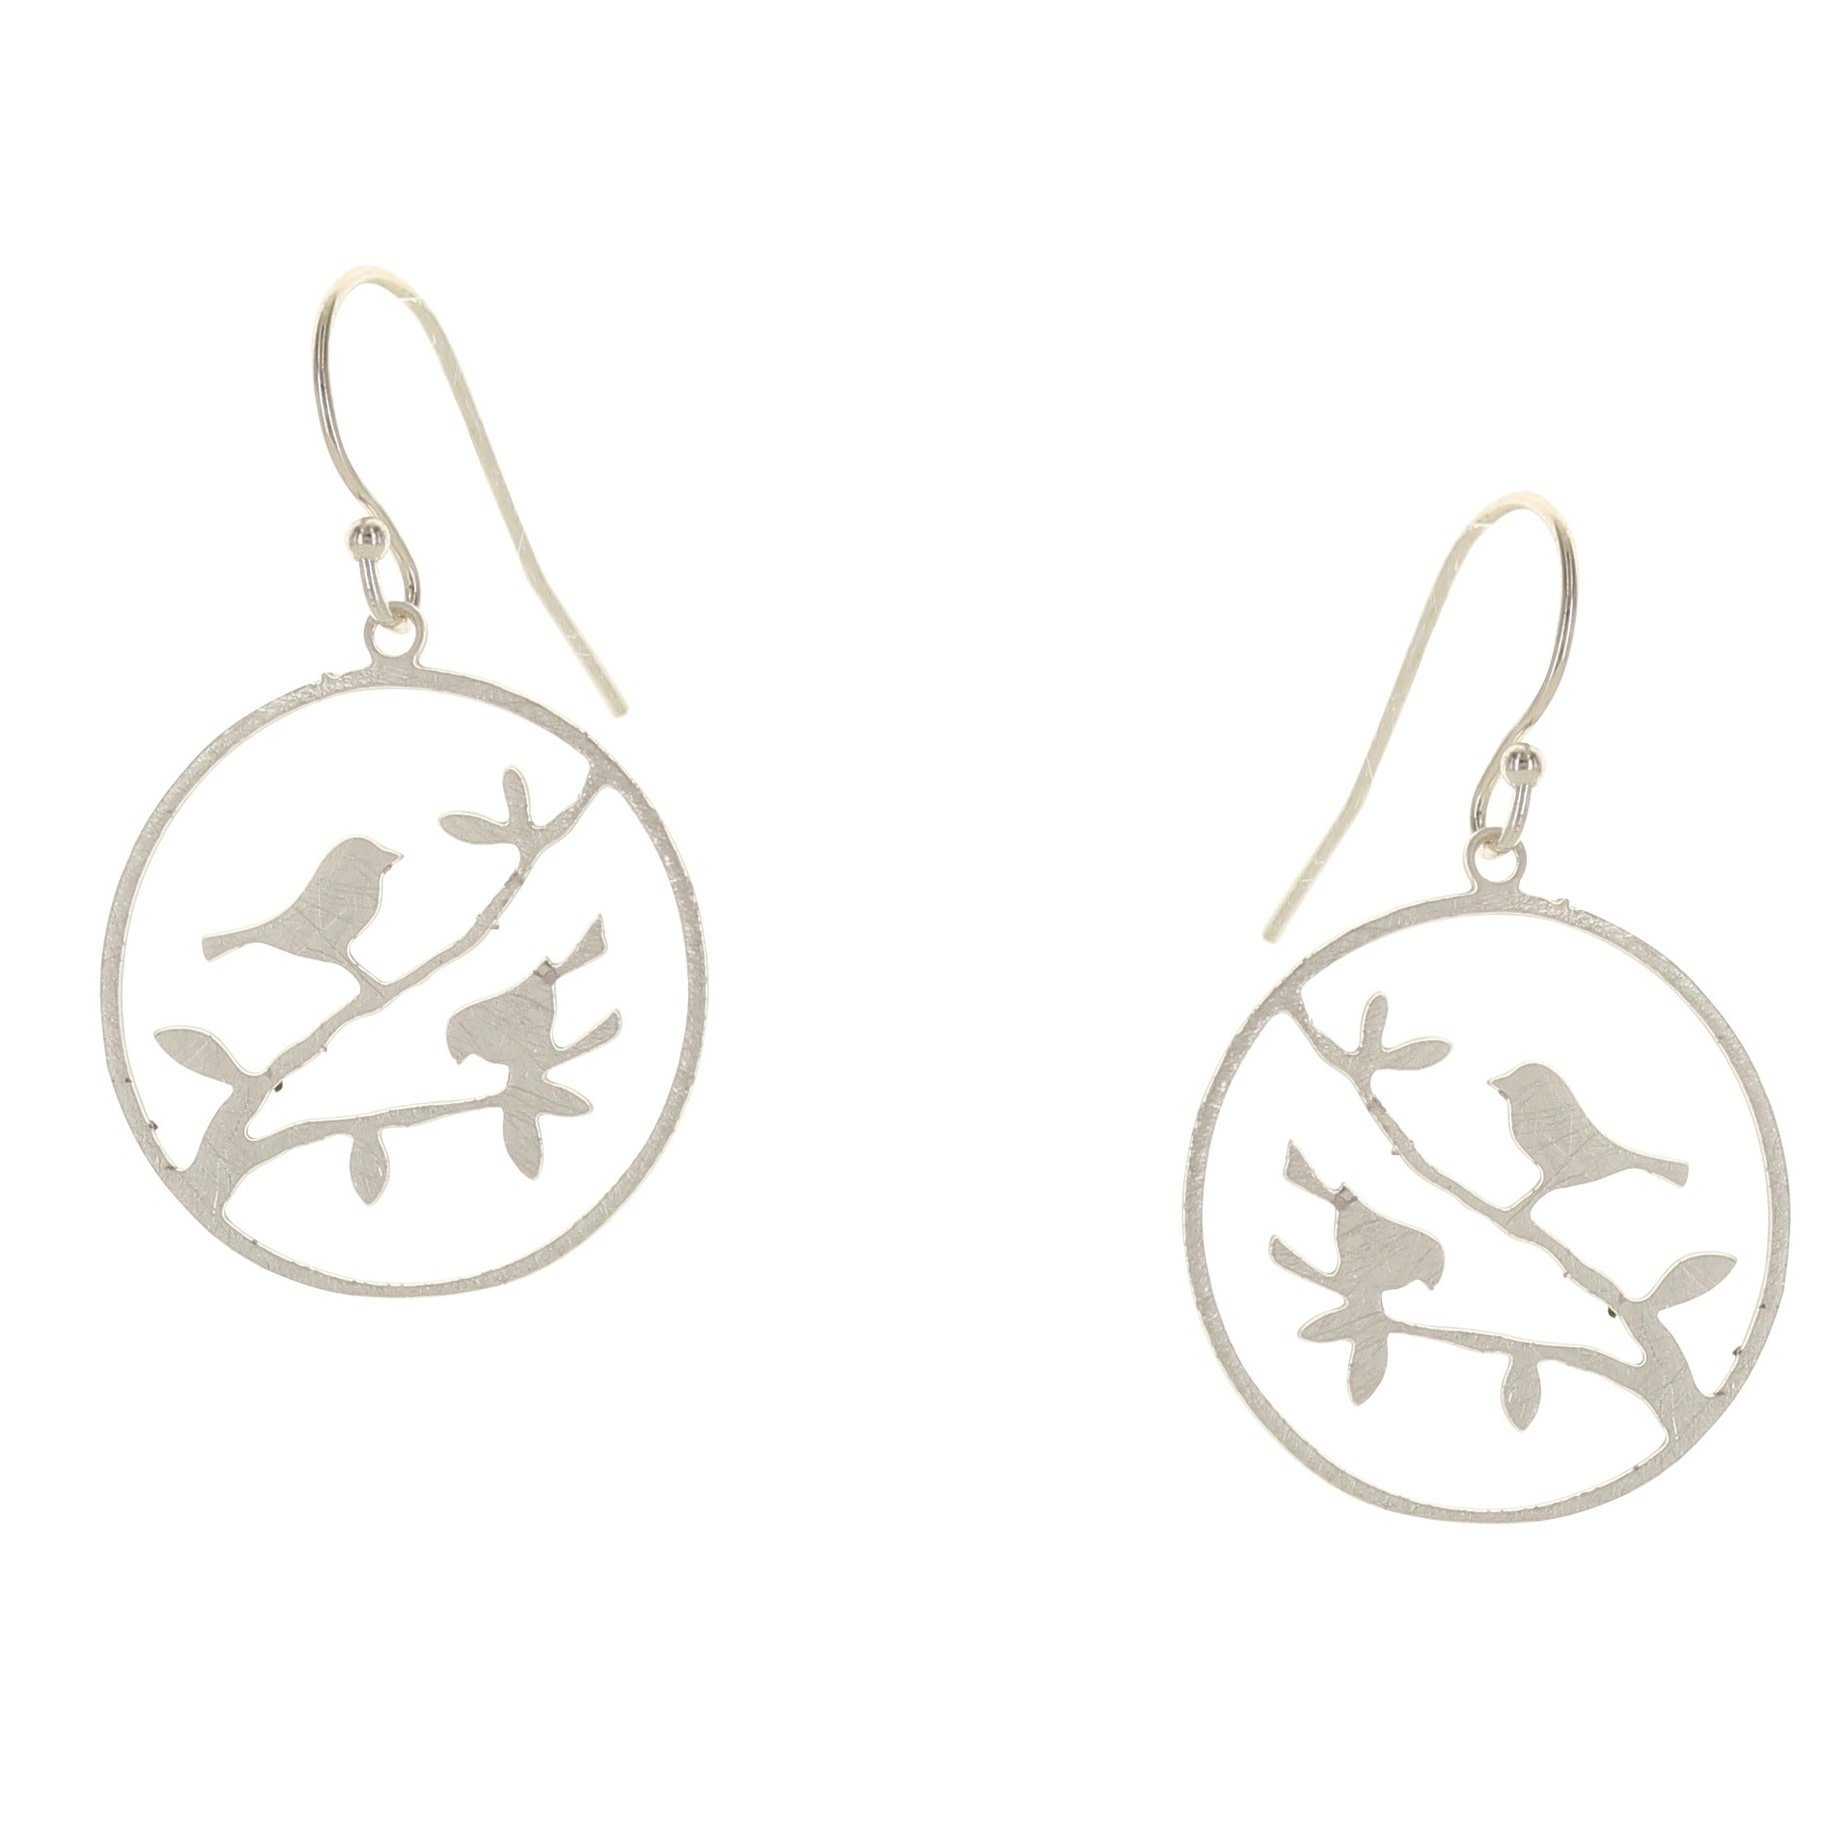 Takobia Birds on Branches Earrings